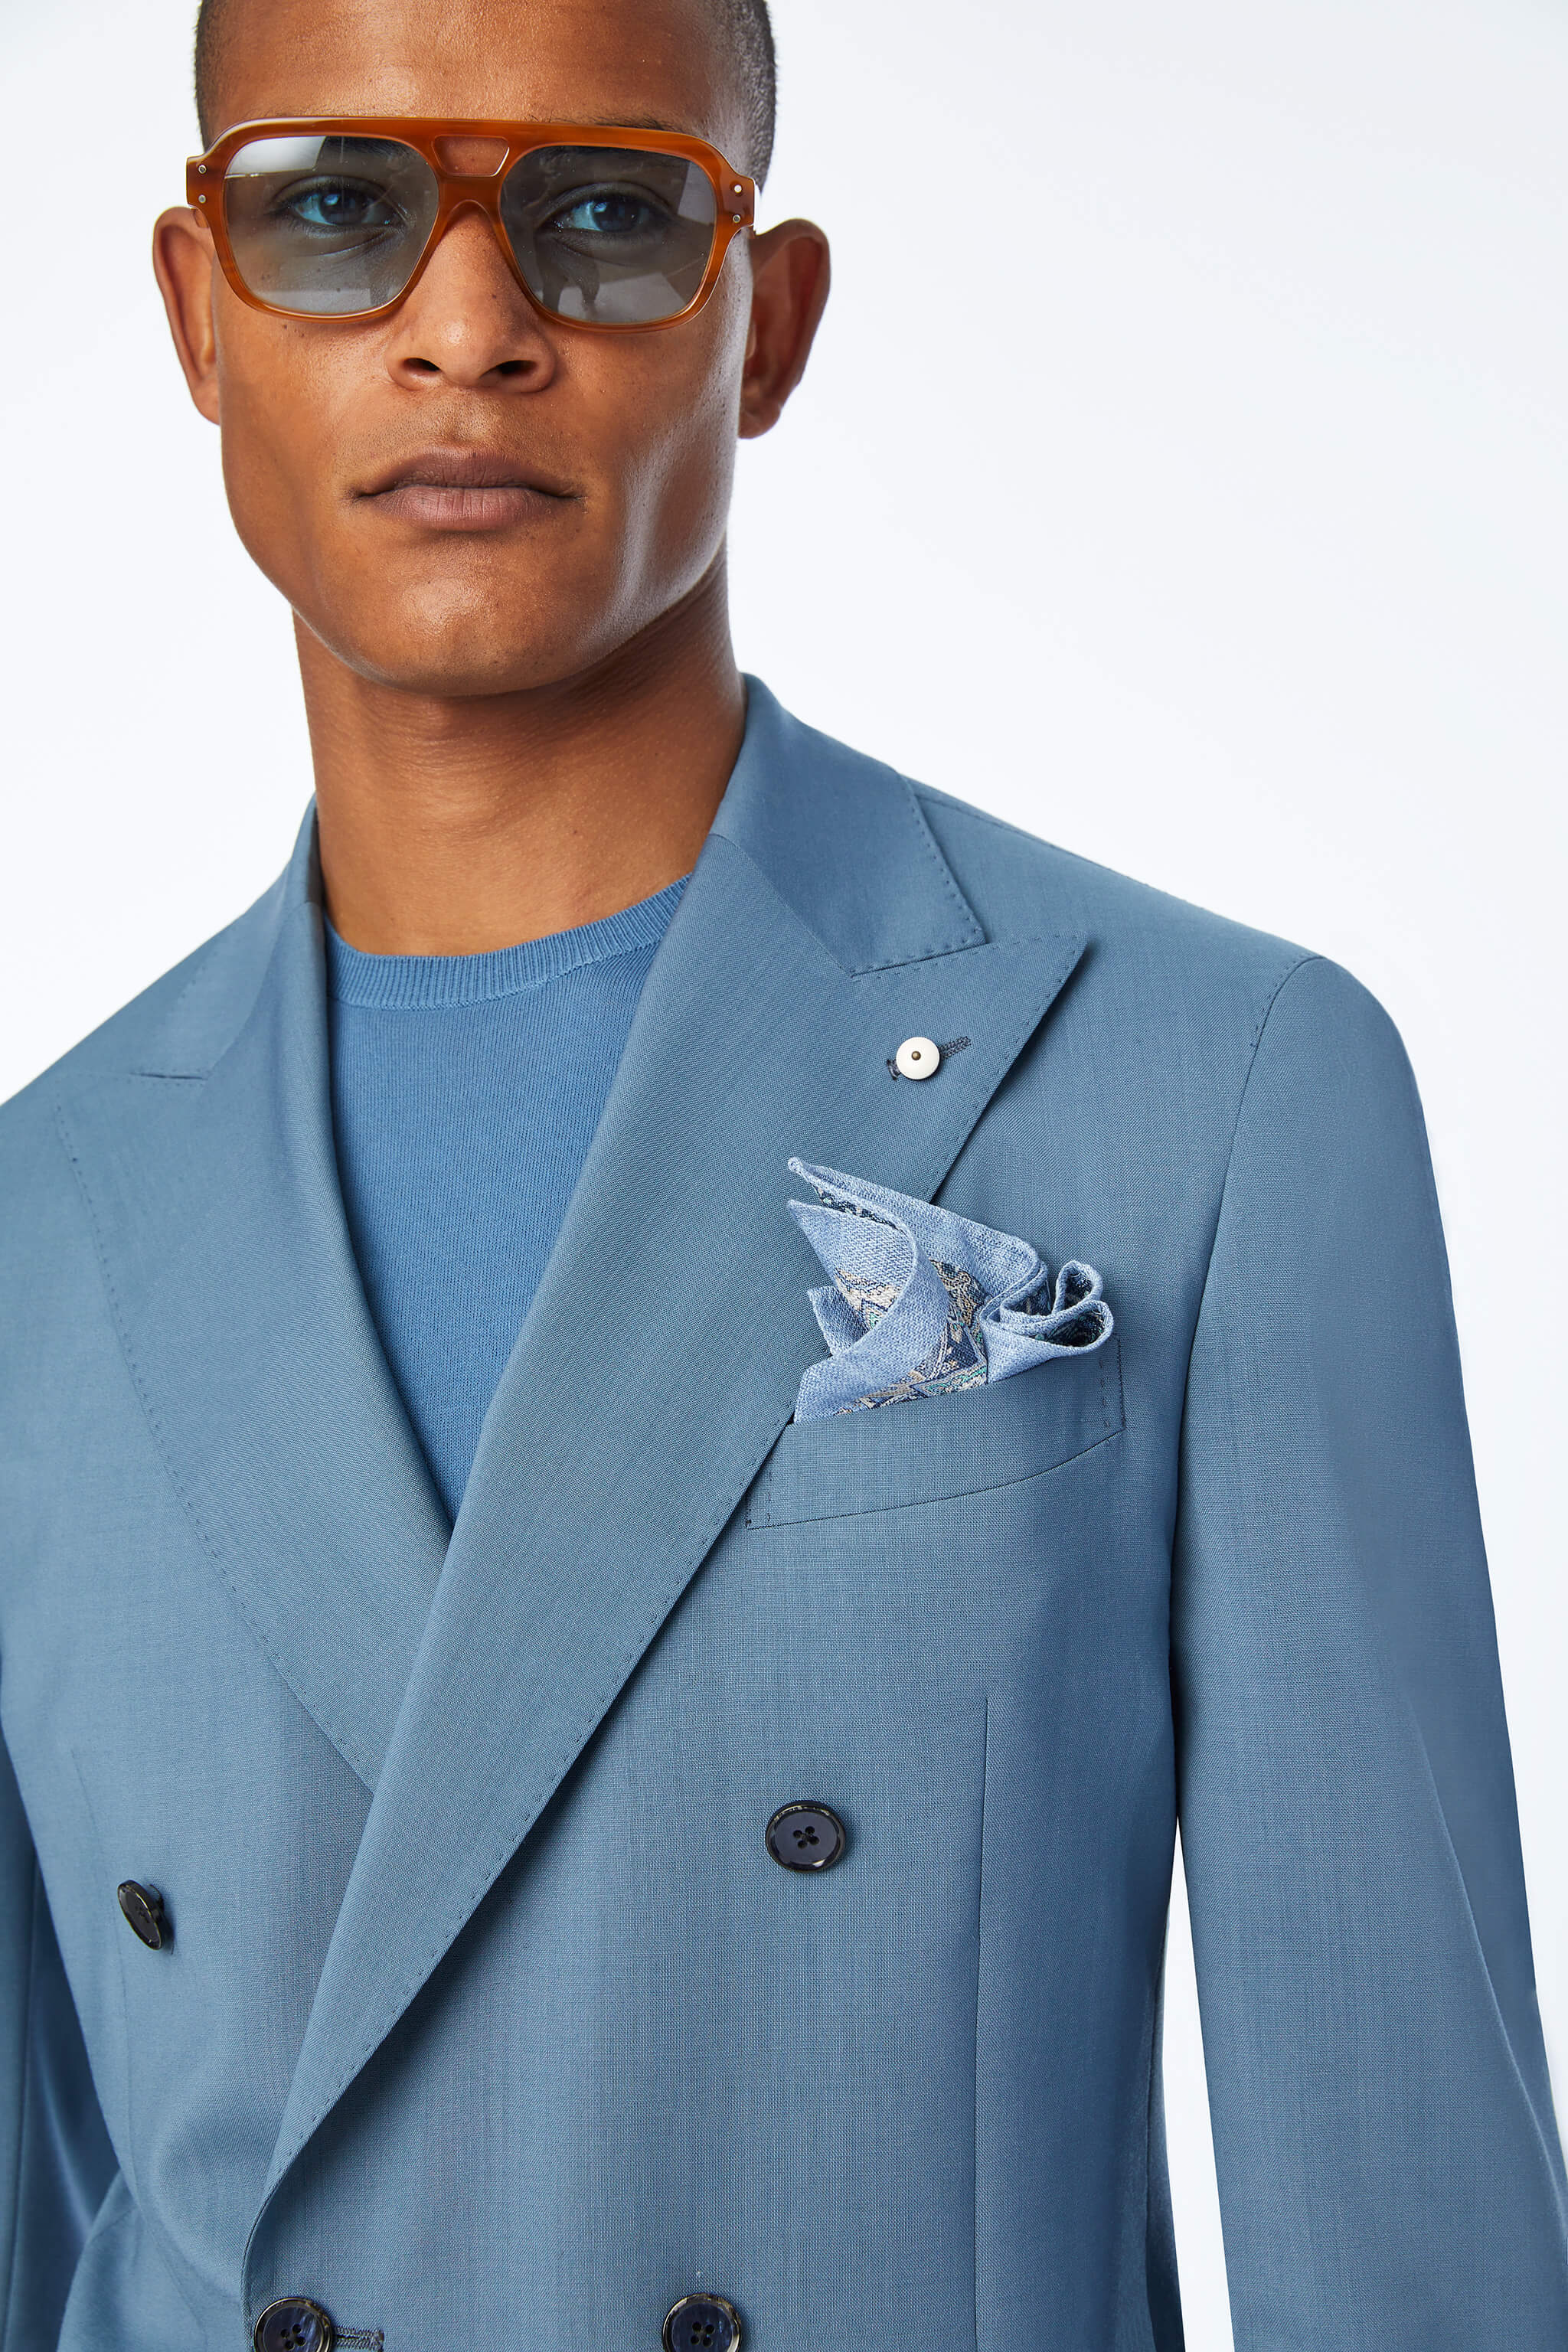 Garment-dyed TOM suit in light Blue